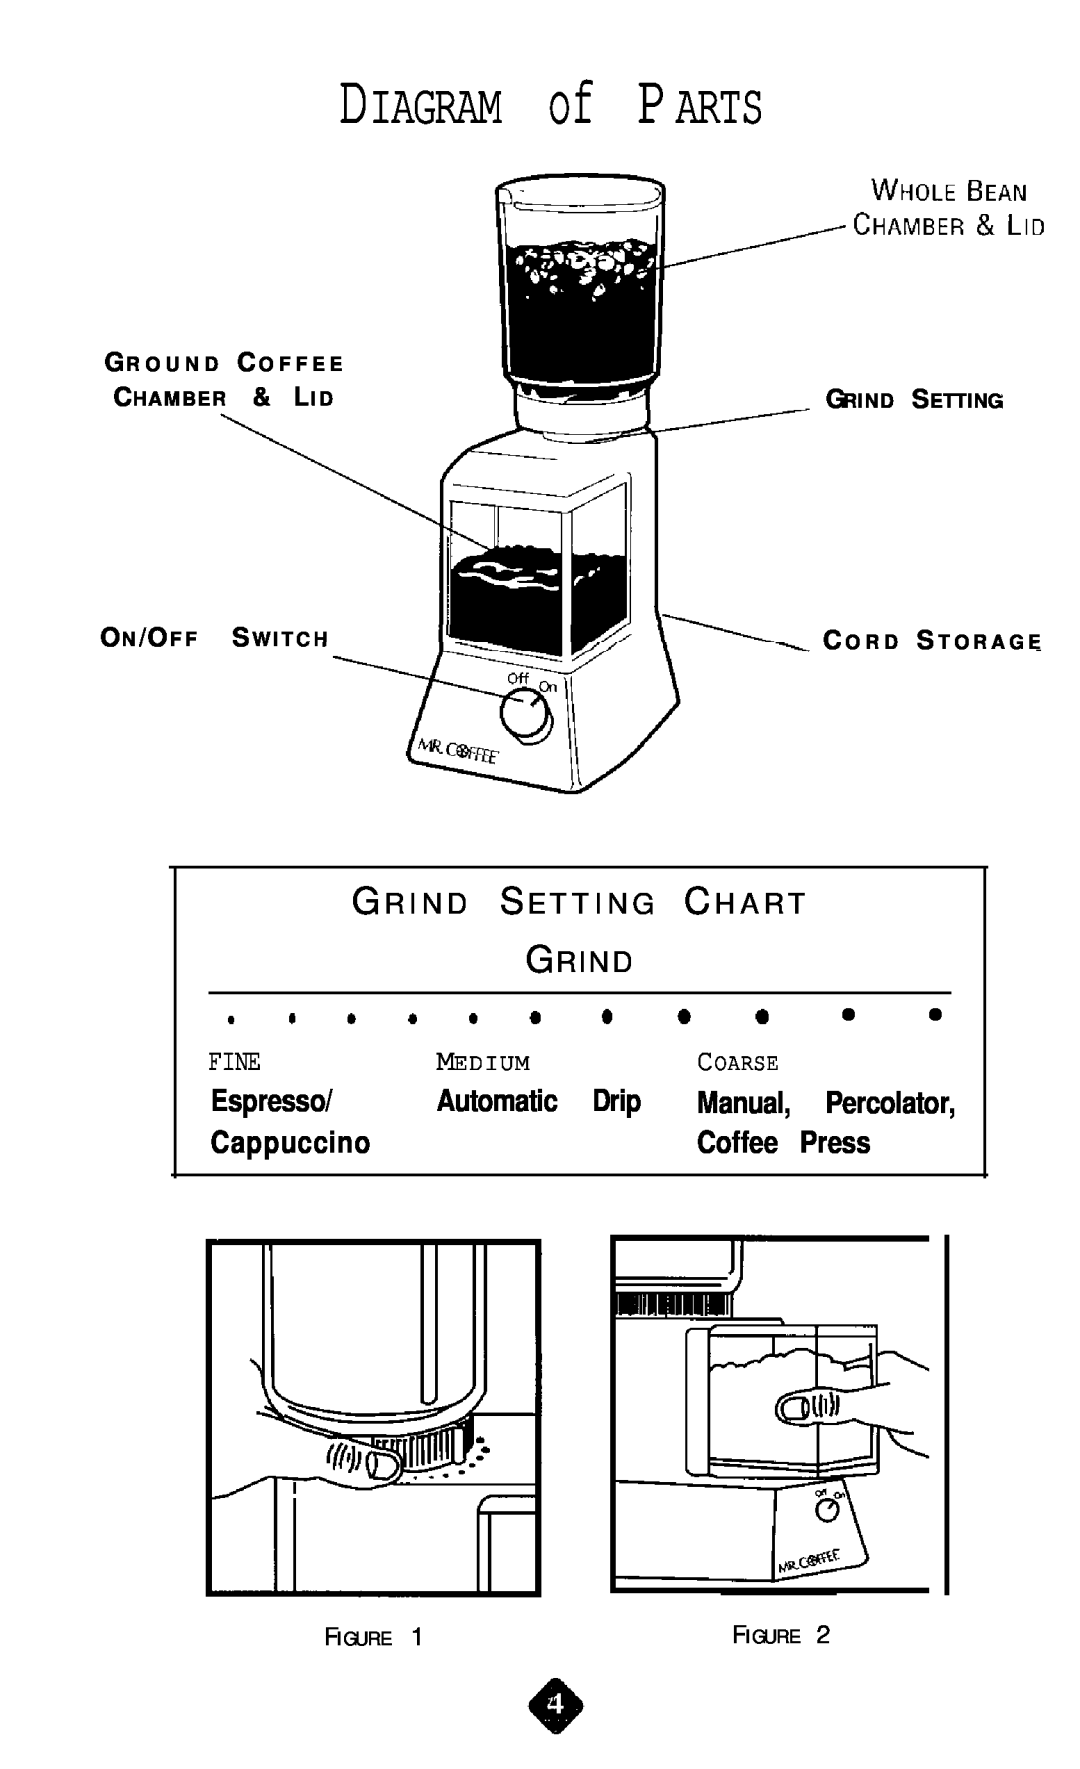 Mr. Coffee BM Series DIAGRAM of PARTS, Drip, Coffee, Press, Grind Setting Chart Grind, Espresso, Automatic, Cappuccino 